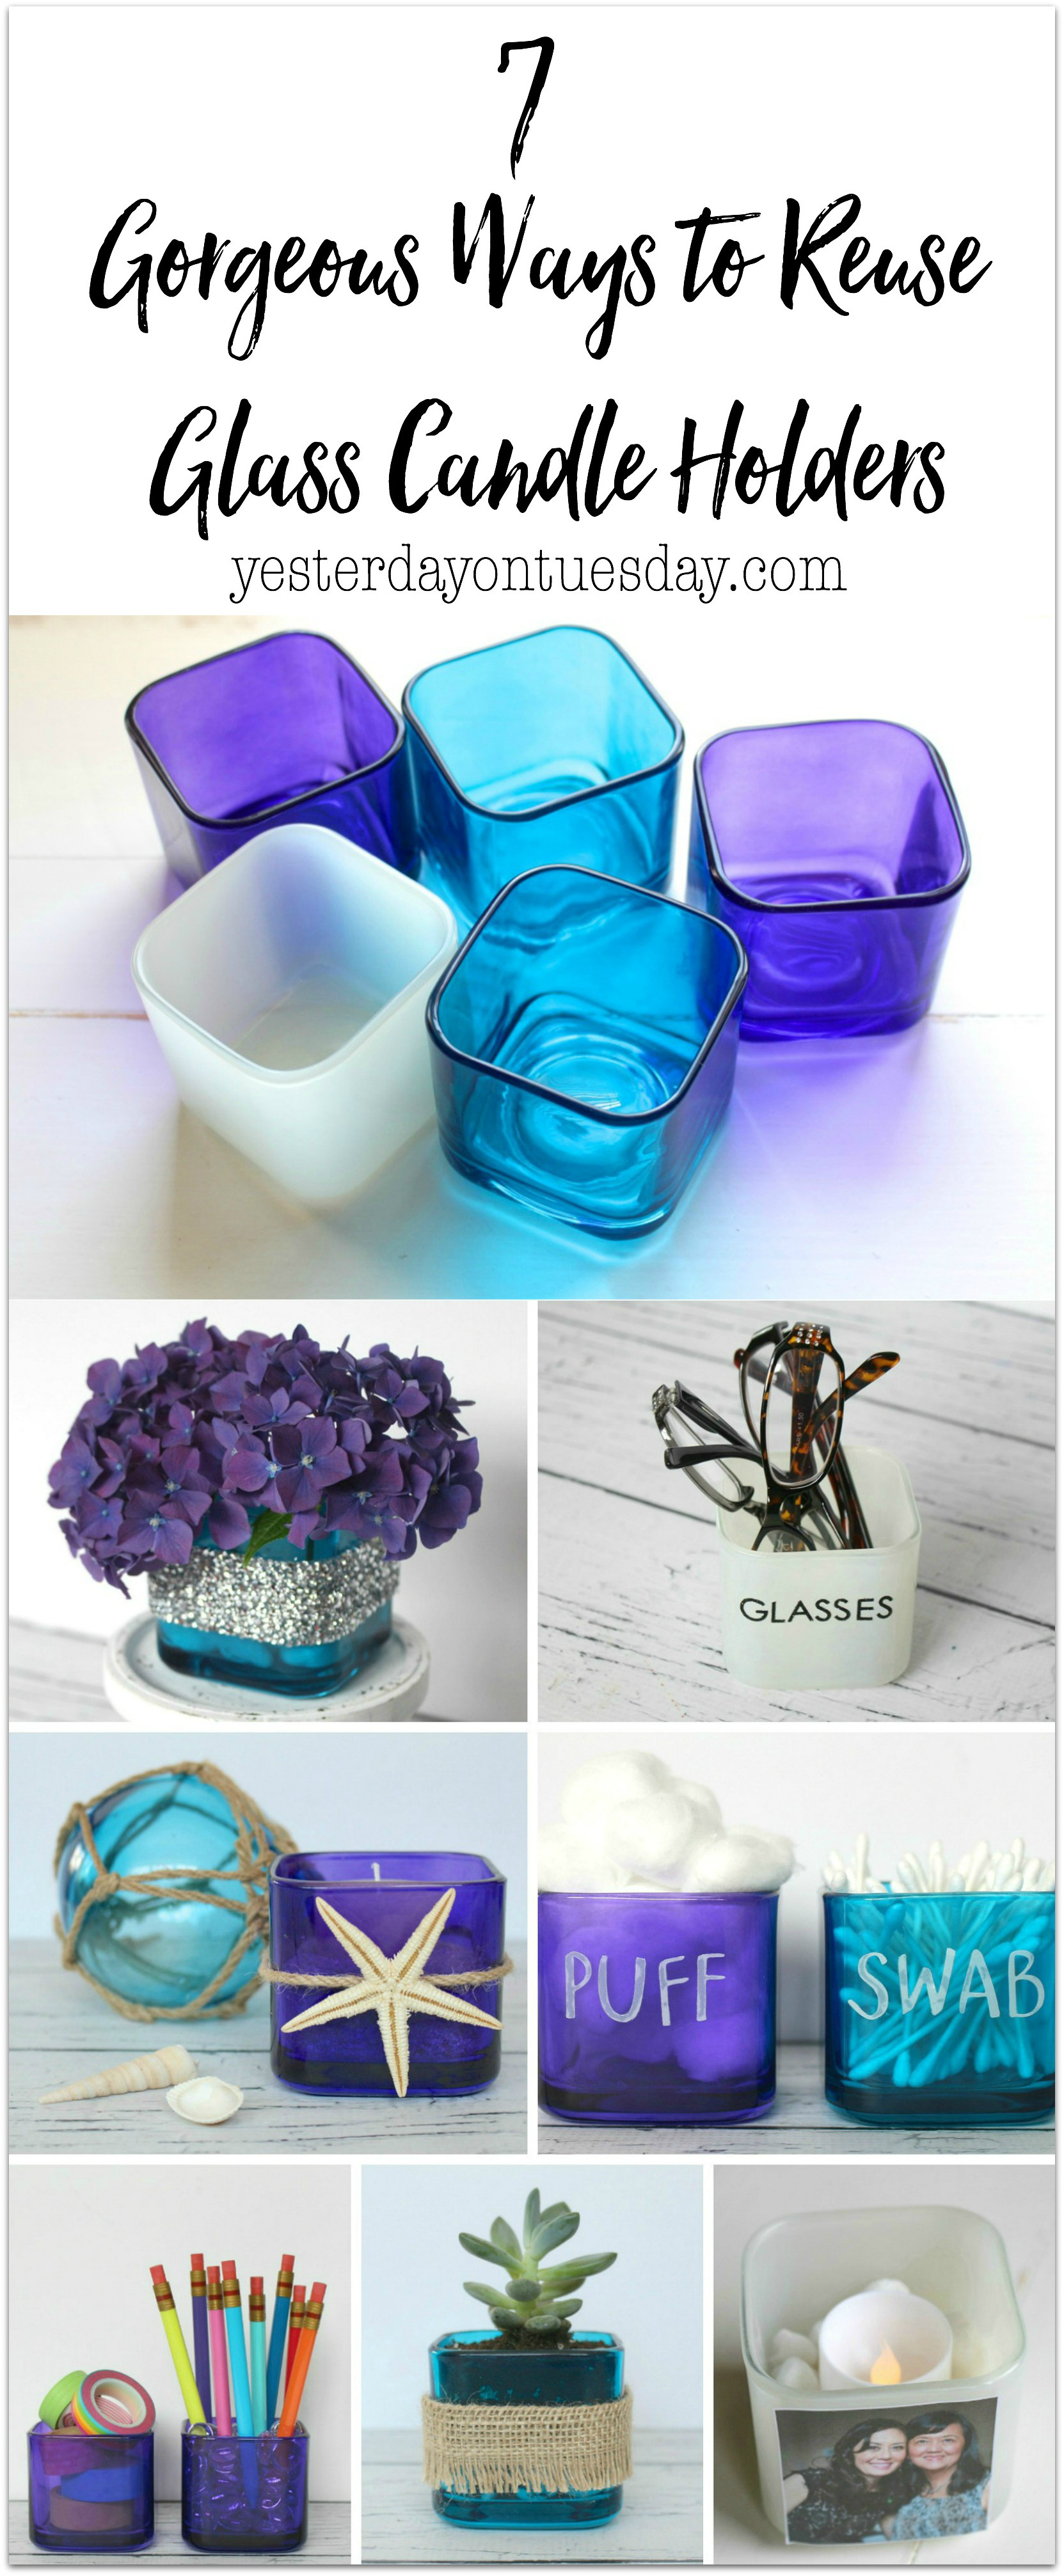 clear glass vases michaels of 7 gorgeous ways to reuse glass candle holders in 7 gorgeous ways to reuse glass candle holders